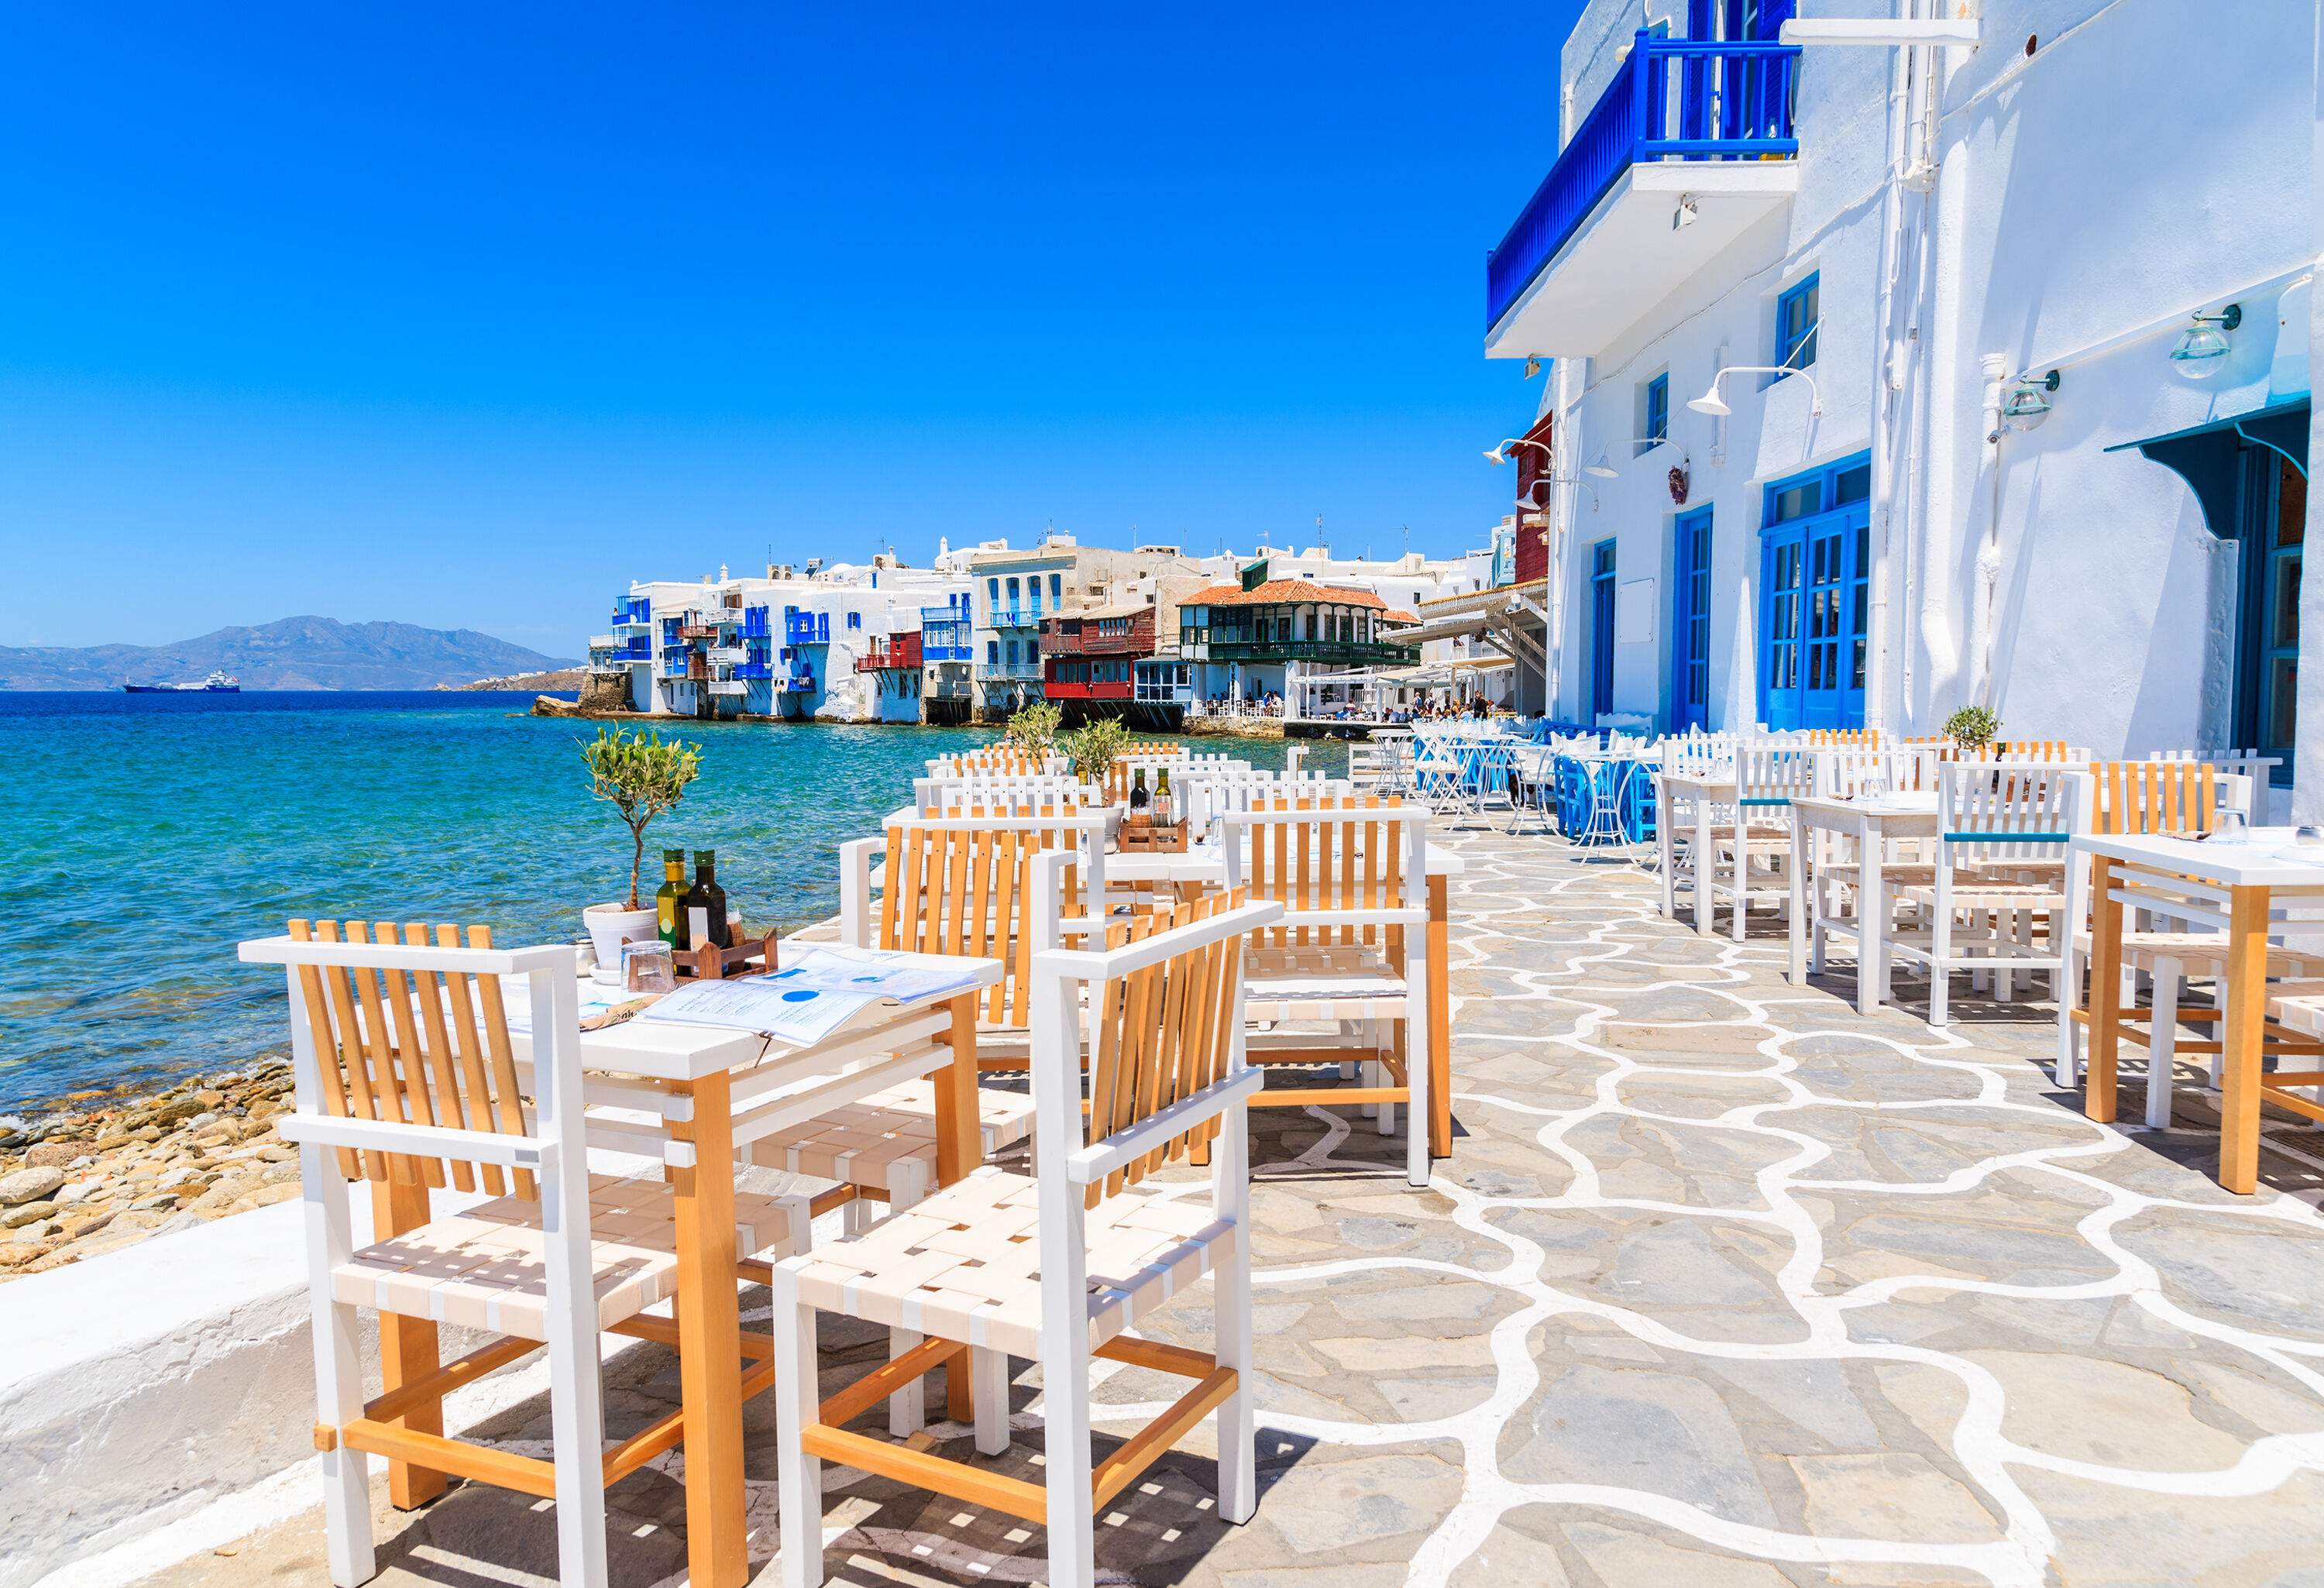 A typical cobbled promenade in Greece with outdoor cafes and whitewashed buildings.